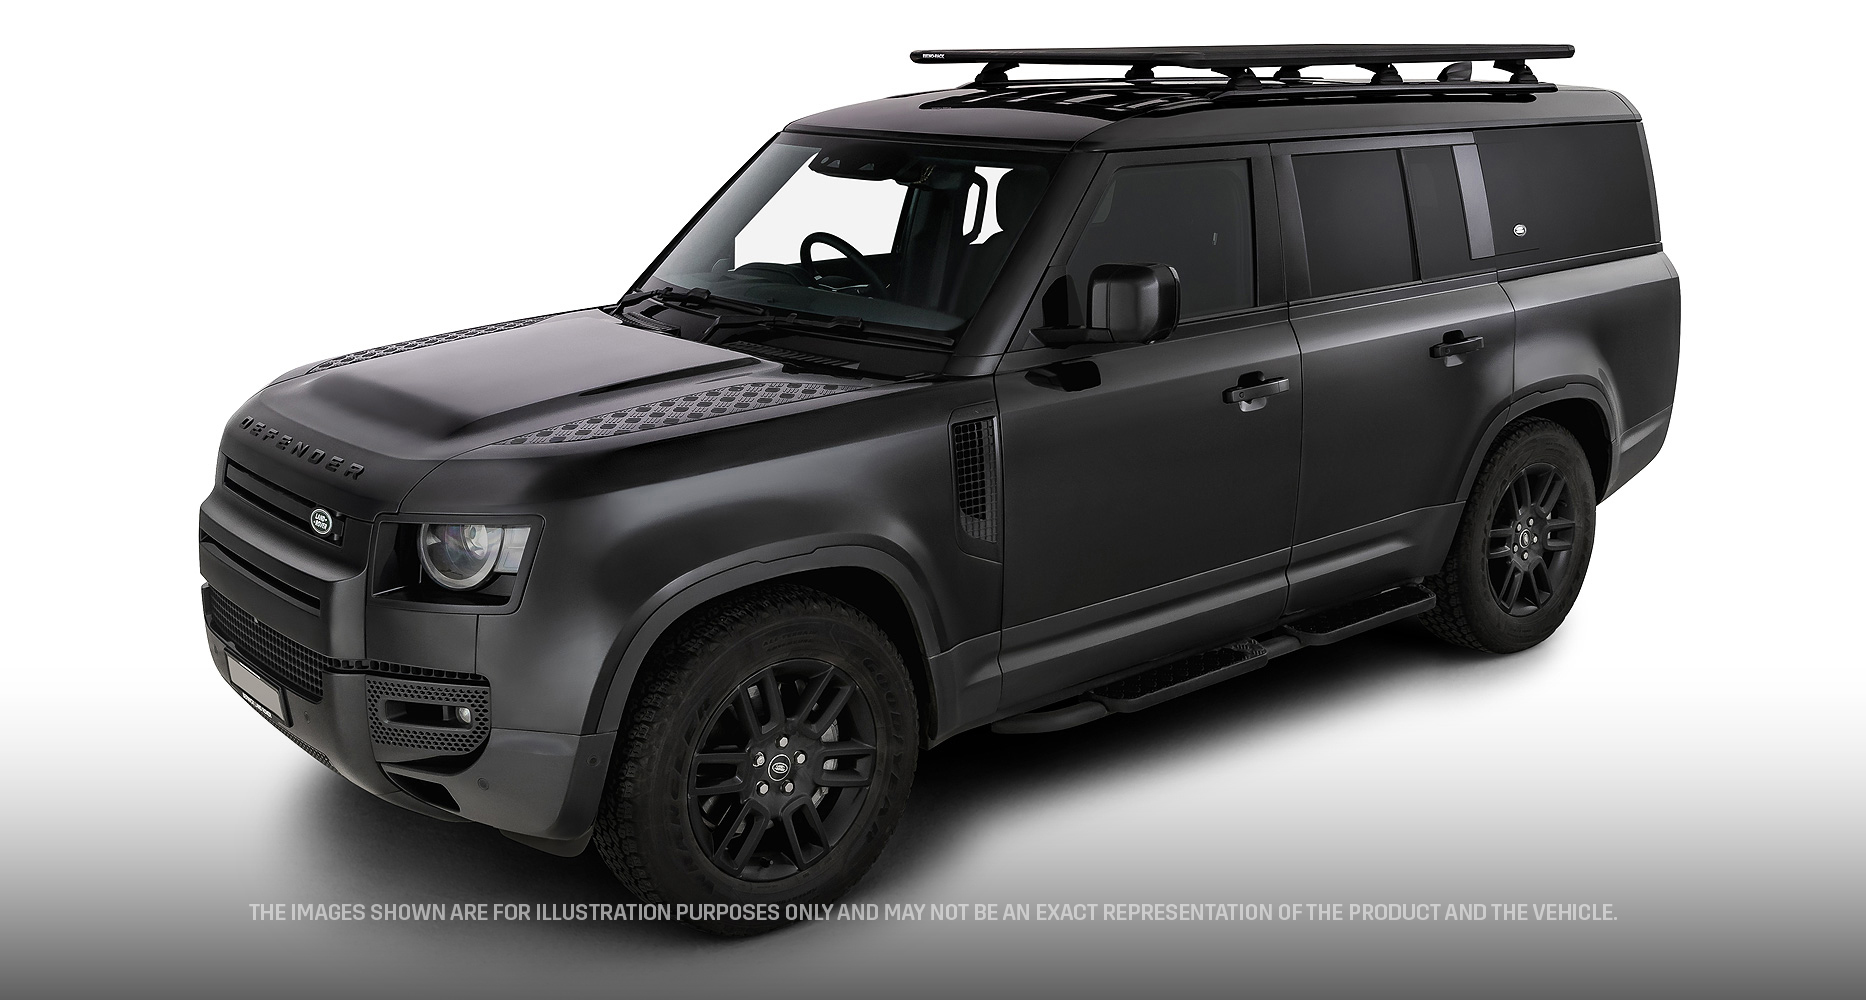 Rhino Rack JC-01930 Pioneer 6 Platform (2100mm x 1240mm) with RCL Legs for Land Rover Defender 90 Gen2 3dr SUV with Factory Fitted Track (2020 onwards) - Factory Point Mount